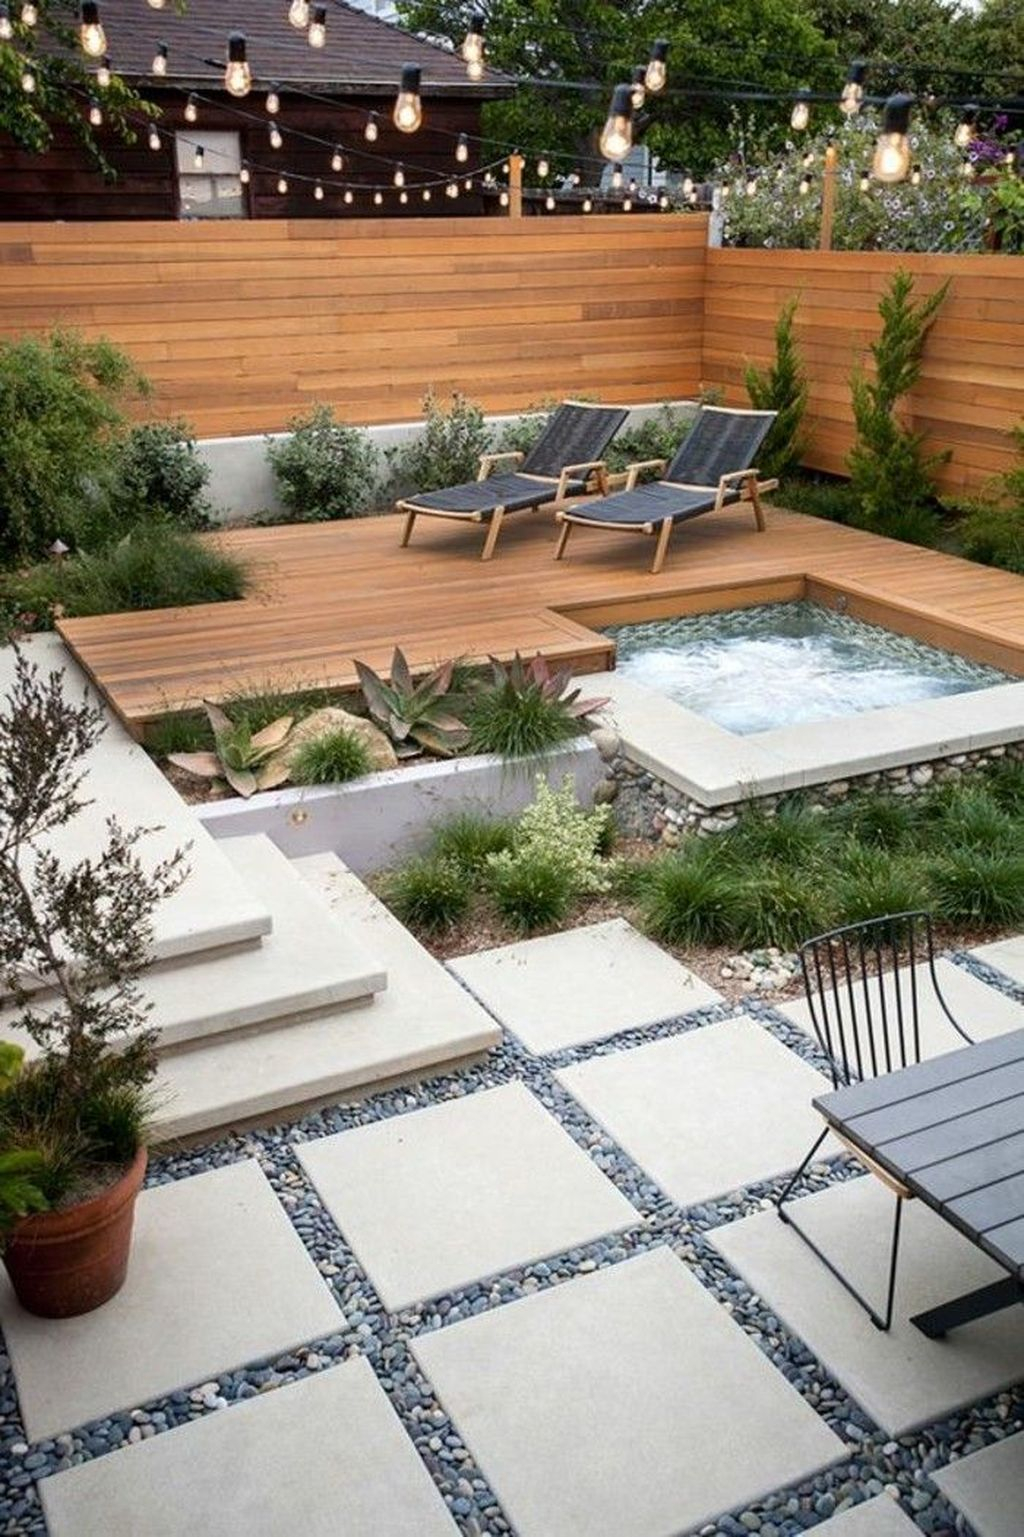 Outstanding Garden Design Ideas With Best Style To Try13